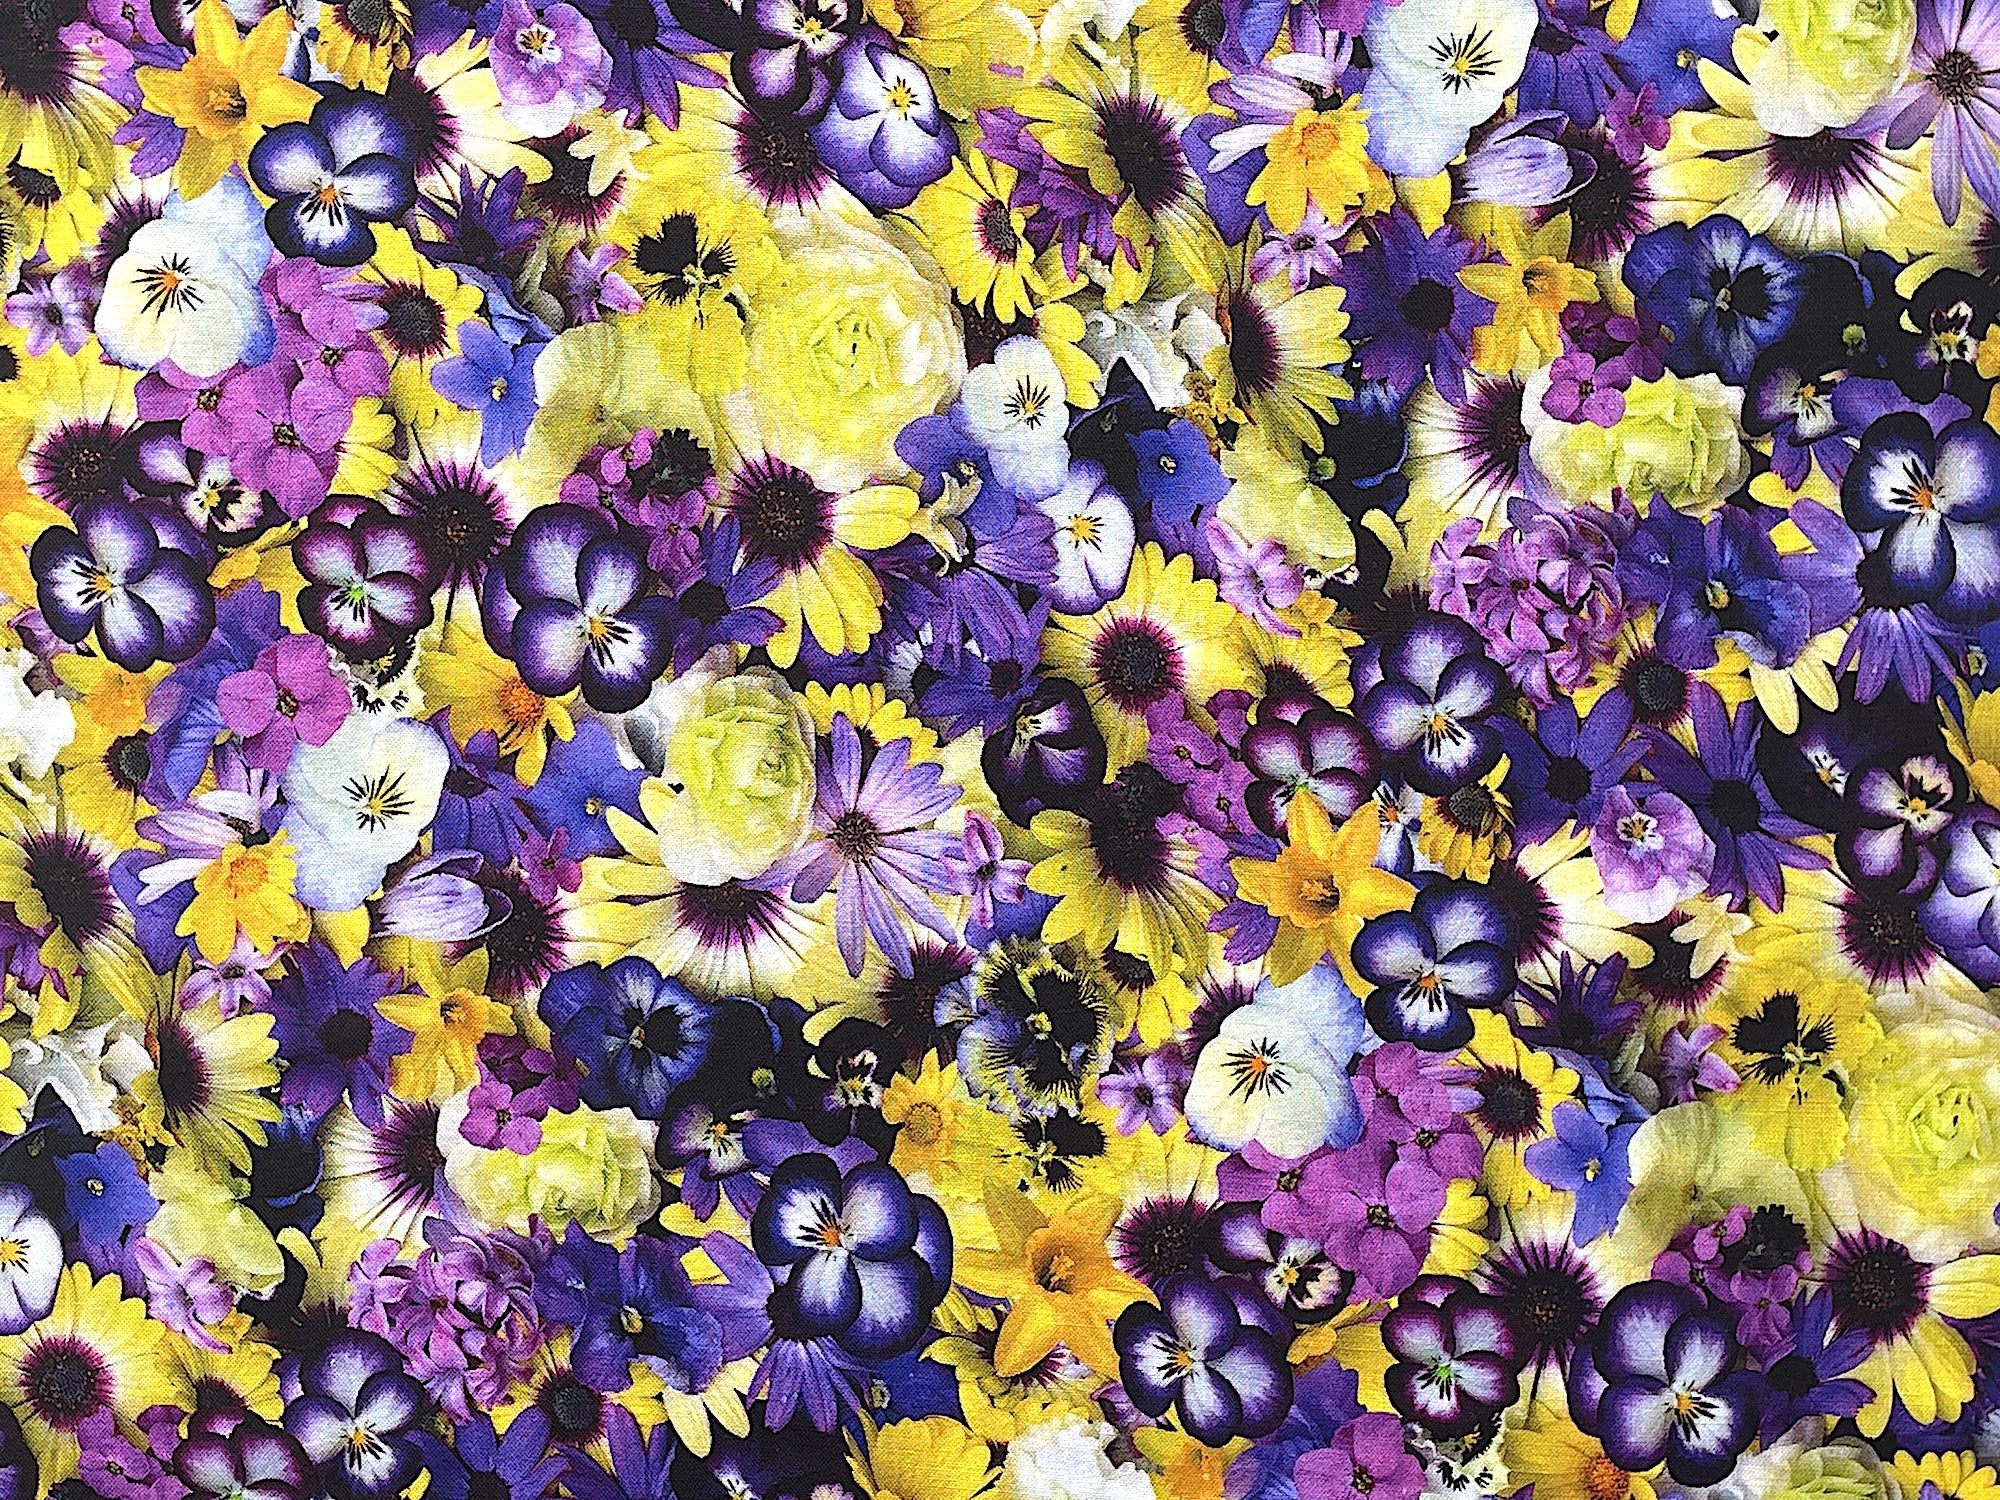 This fabric is part of the Hand Picked collection by Maywood Studio. You will find purple, yellow and white pansies, yellow daffodils and yellow and purple daisies packed in this cotton fabric.